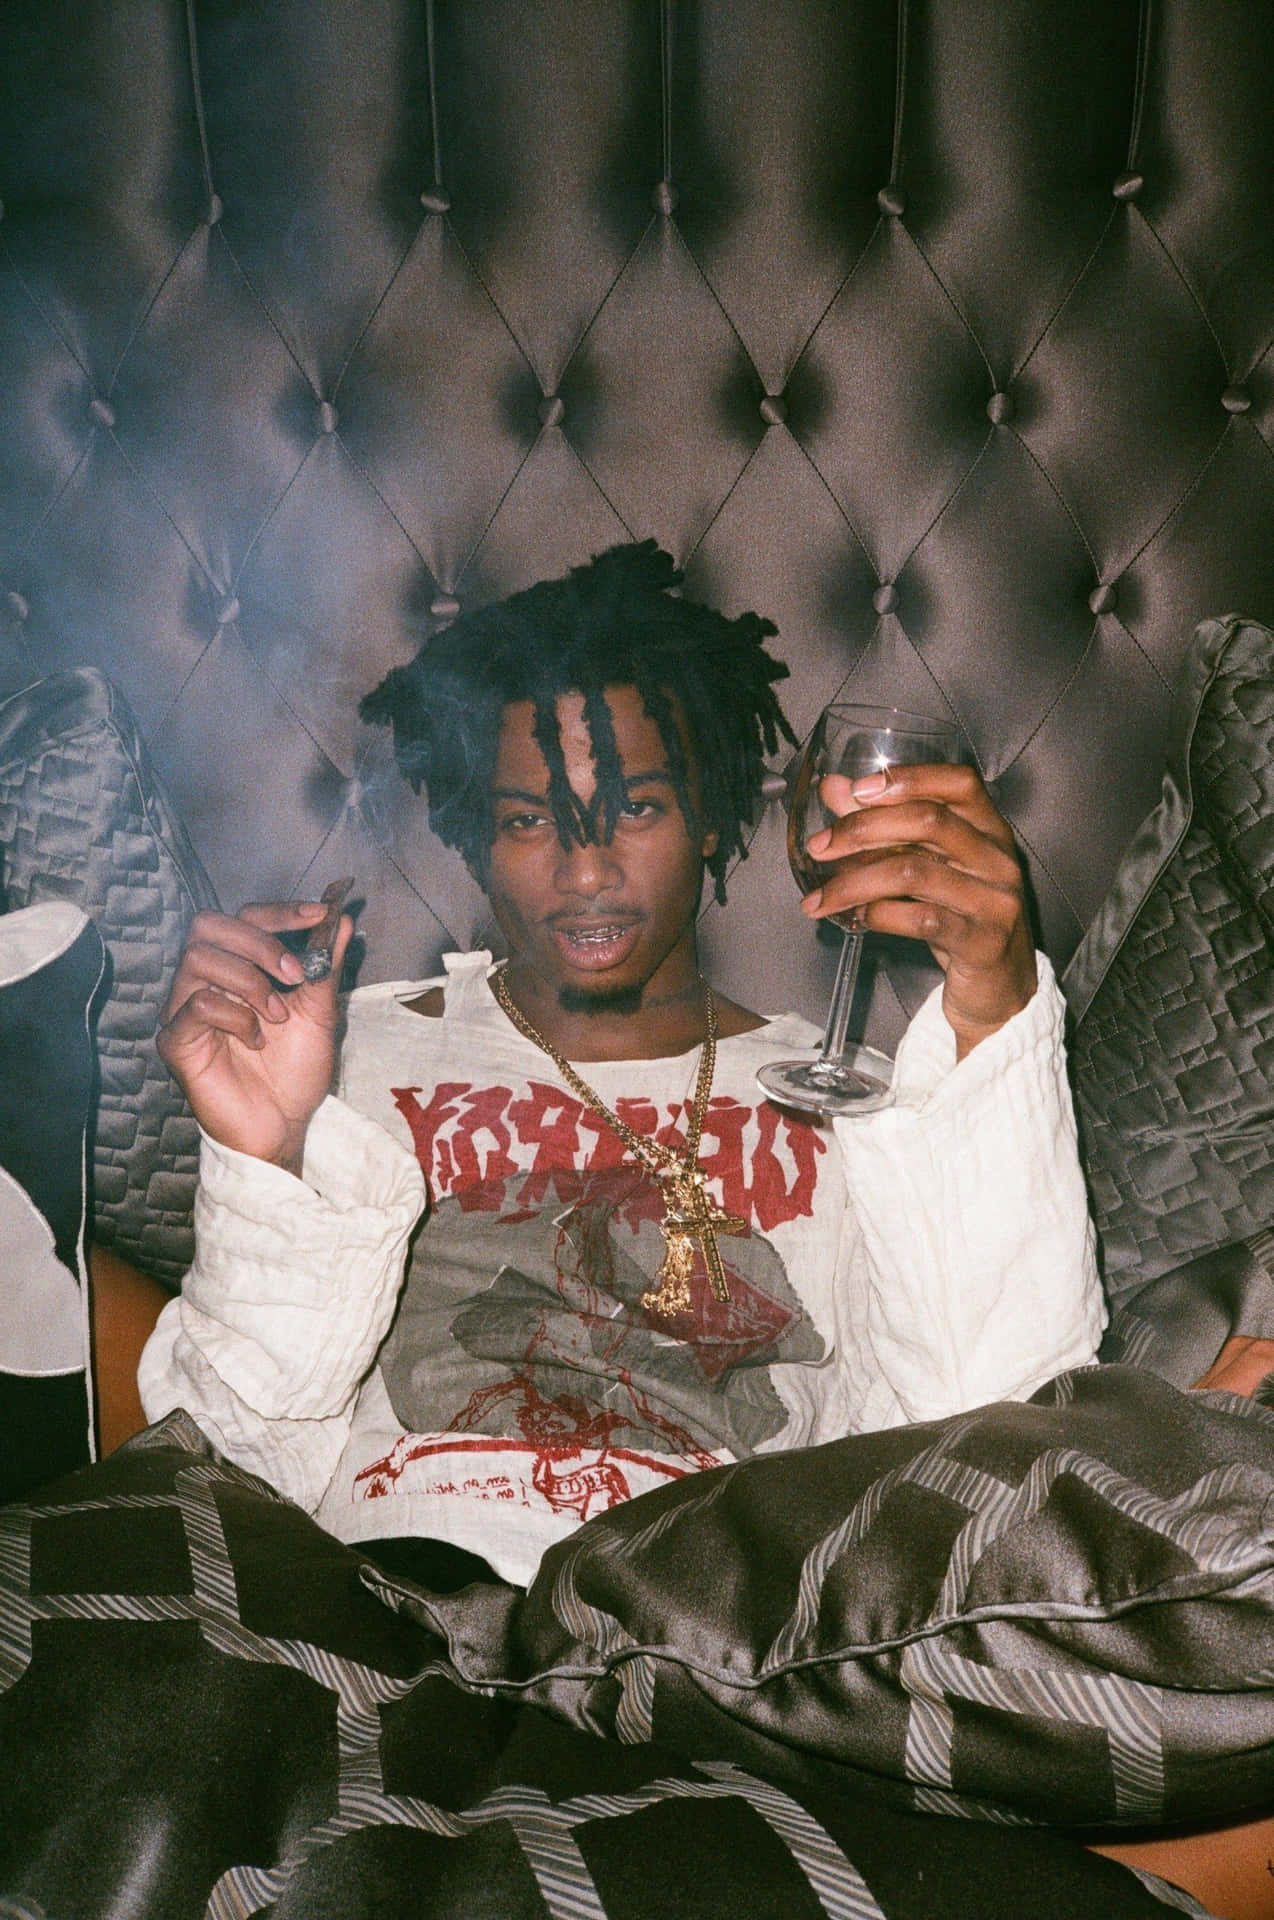 Playboi Carti: Bringing the Heat to Your iPhone Wallpaper